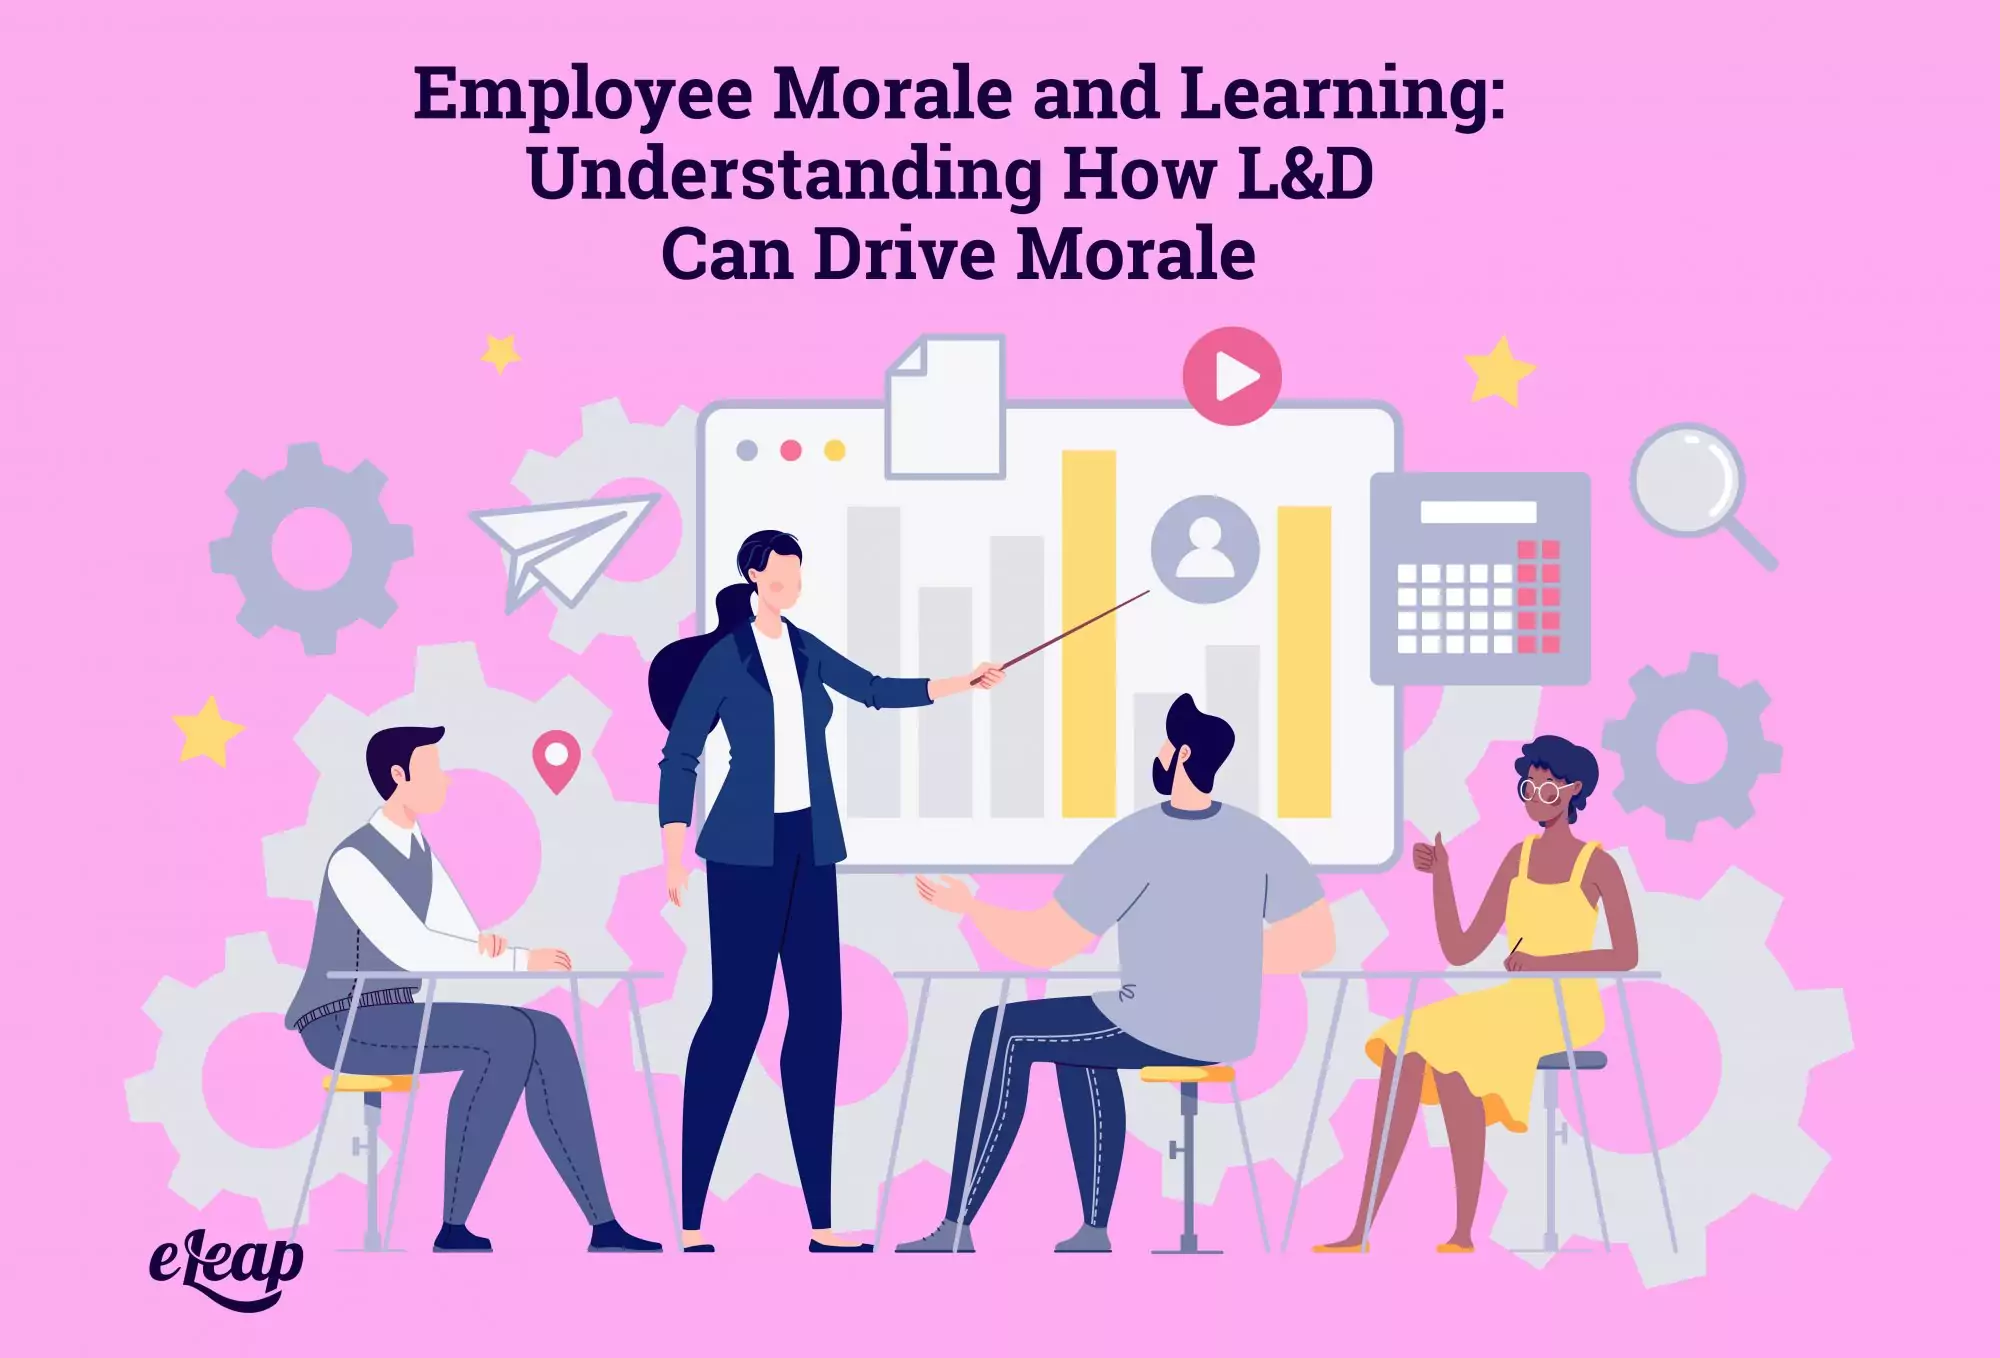 Employee Morale and Learning: Understanding How L&D Can Drive Morale